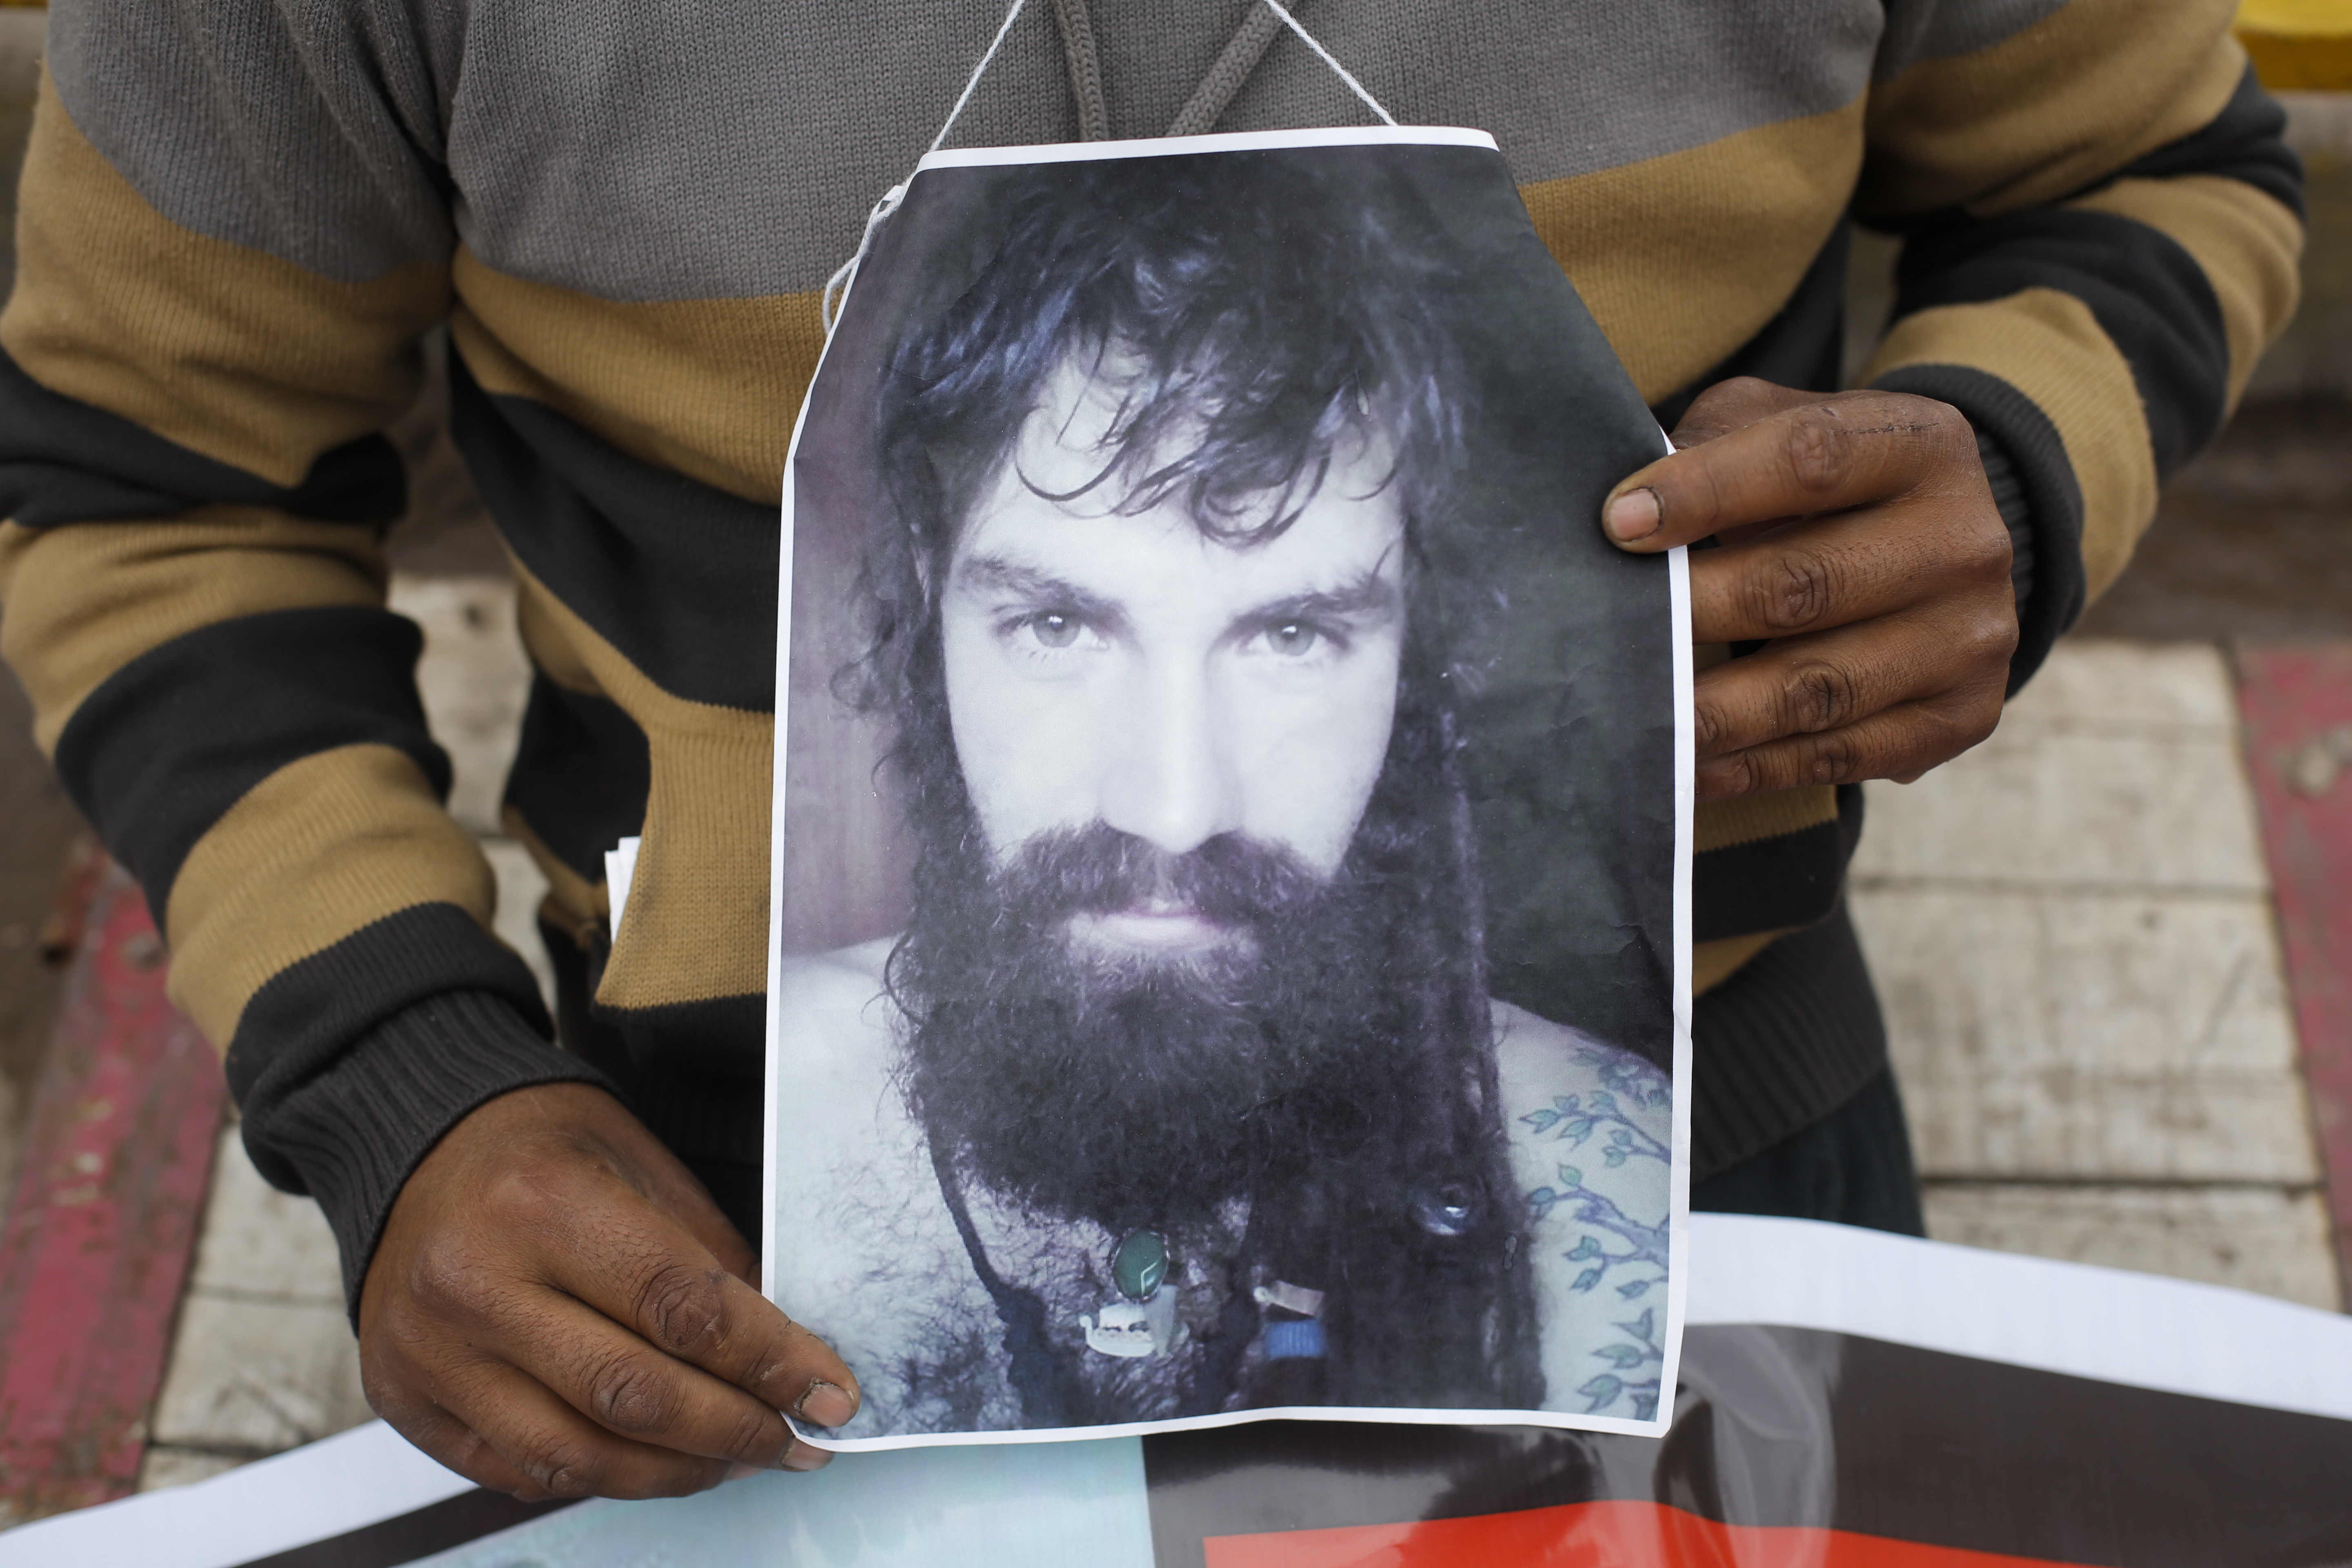 An activist holds a photo of Santiago Maldonado during a protest against his disappearance, outside Congress in Buenos Aires, Argentina, Monday, Aug. 7, 2017. Santiago Maldonado's family says Argentine border police captured him on Aug. 1 during an operative to move Mapuche indigenous off land they have occupied since 2015, which the Mapuche claim is their ancestral land. The land in question is owned by Italian clothing group Benetton in Argentina's Patagonia, according to Diego Campal, spokesperson for 